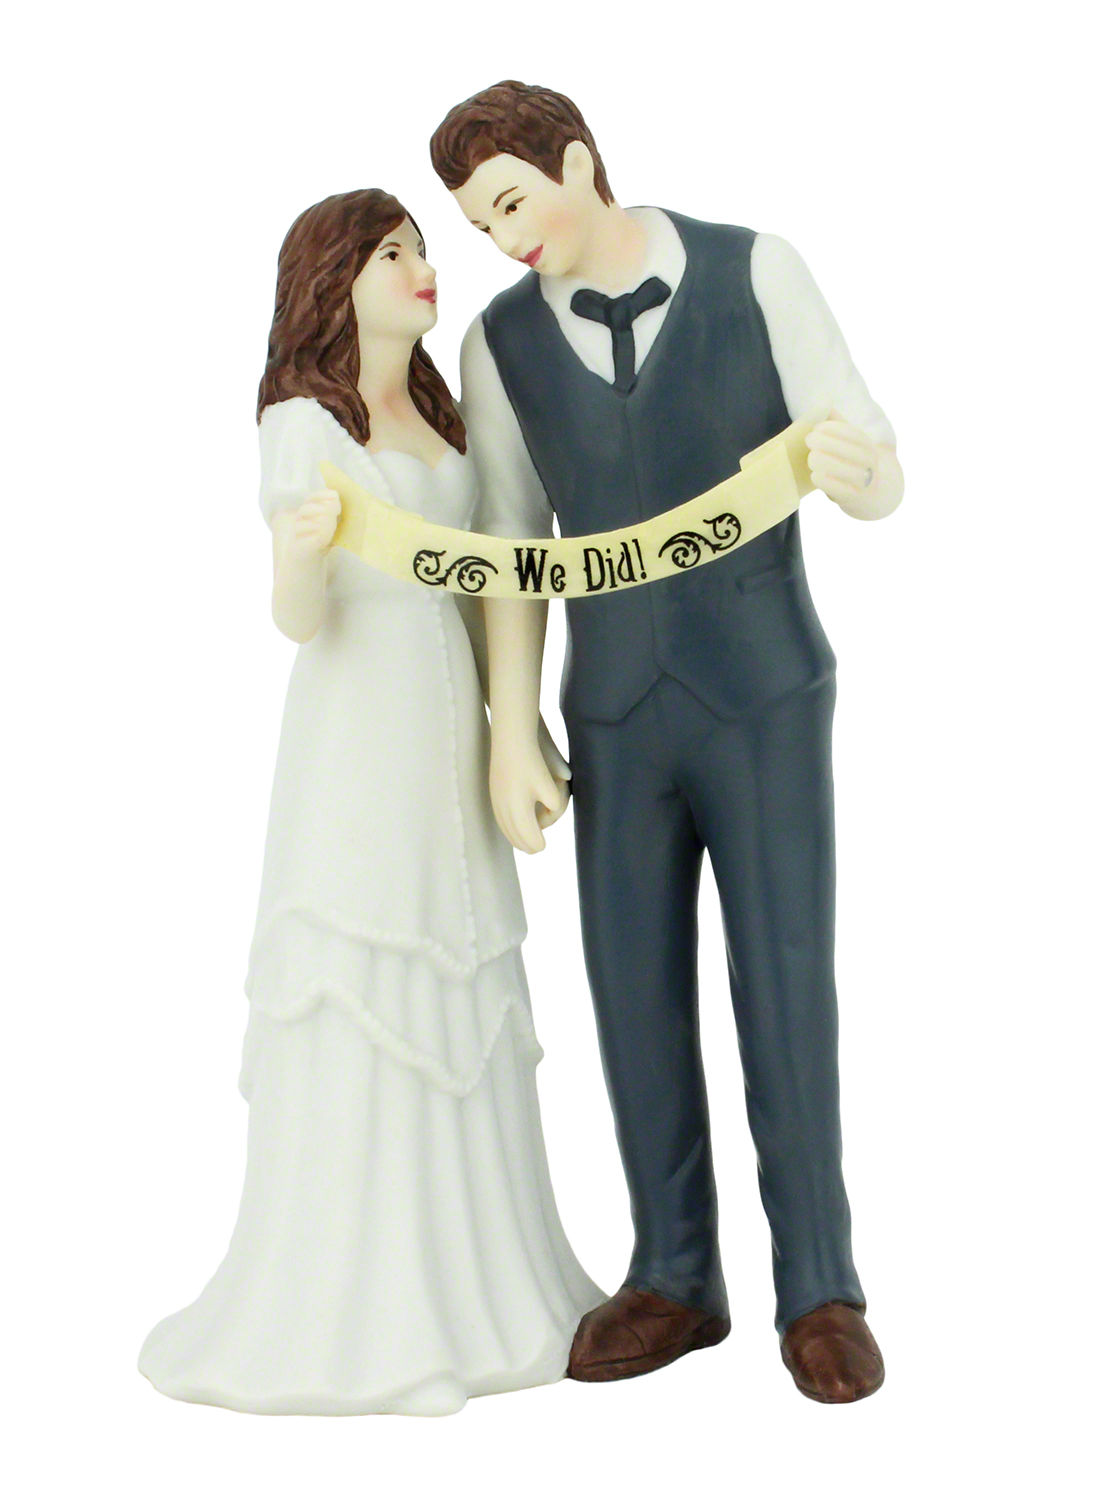 Wedding cake toppers clipart 20 free Cliparts | Download images on ...